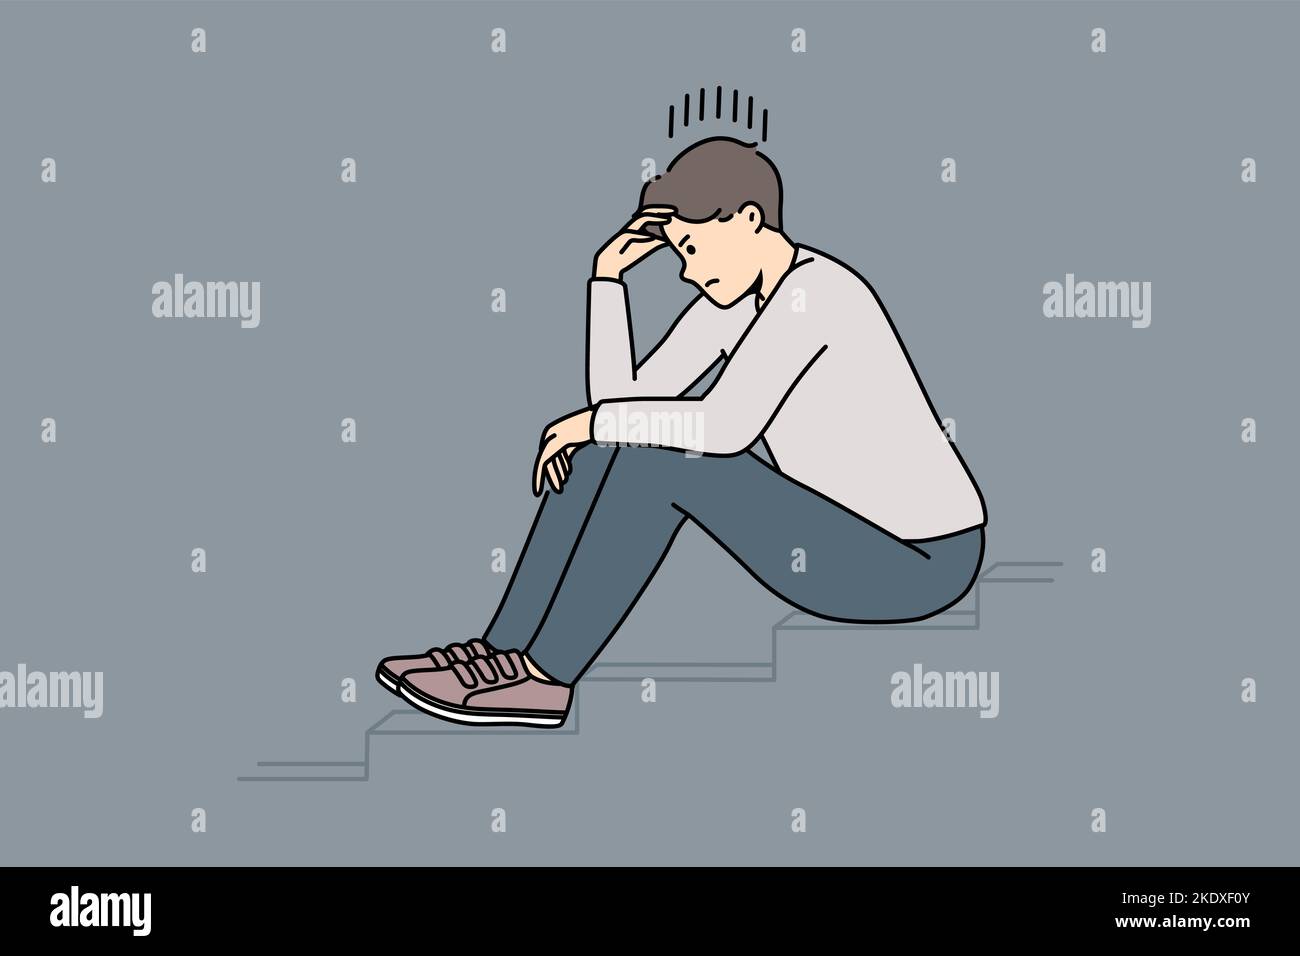 Stressed man sit on stairs thinking or making plan. Distressed unhappy guy lost in thoughts having dilemma or issue. Vector illustration.  Stock Vector